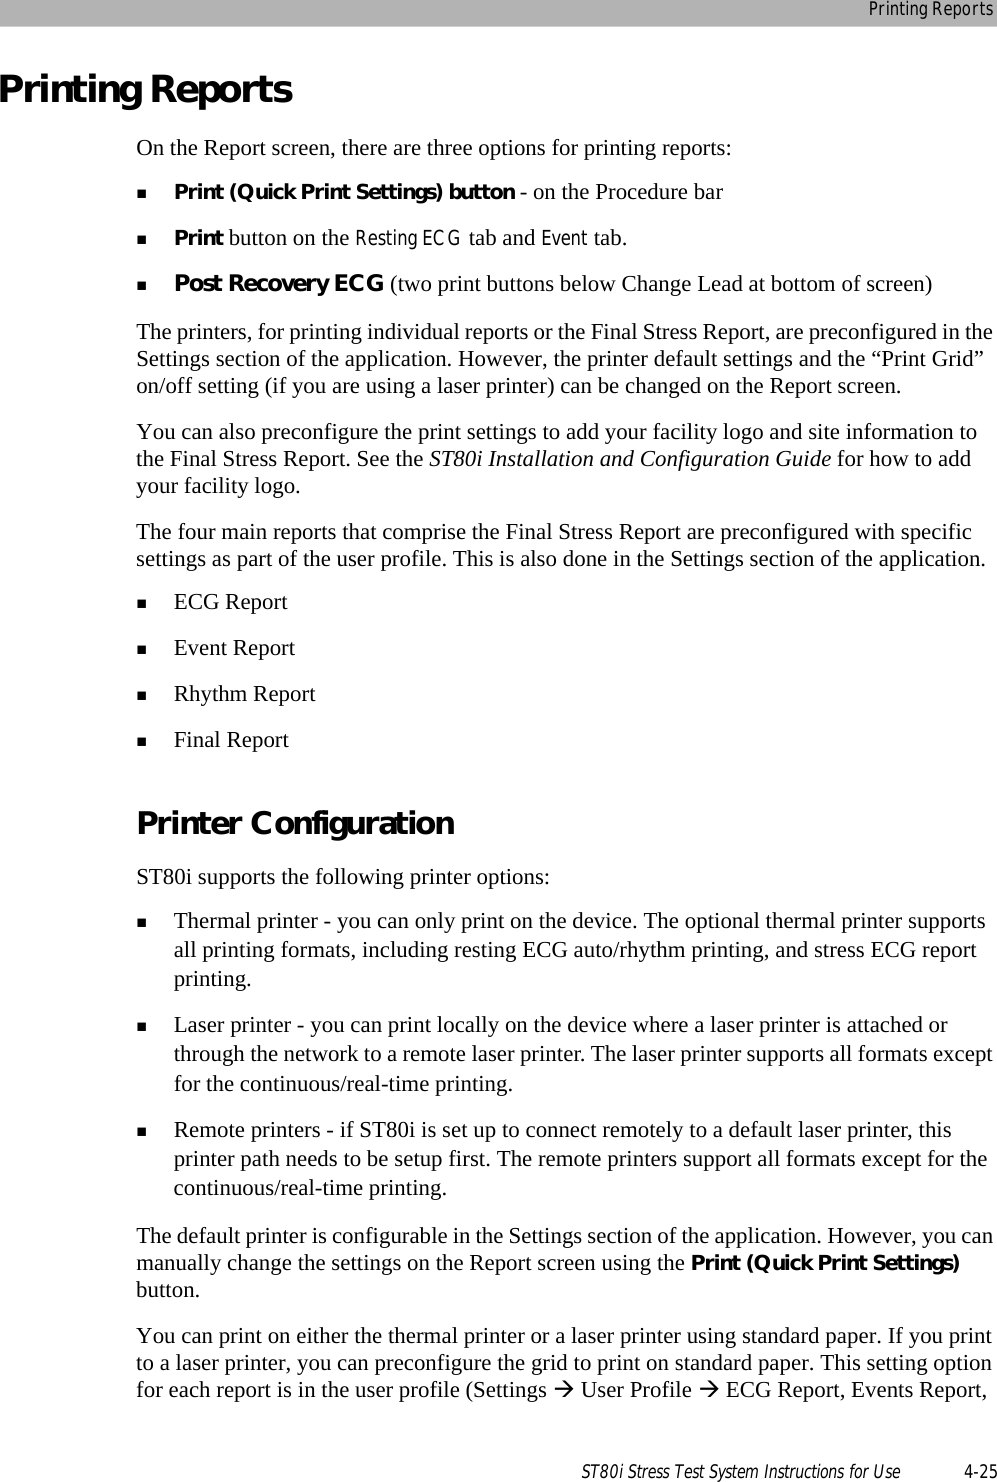 Printing ReportsST80i Stress Test System Instructions for Use 4-25Printing ReportsOn the Report screen, there are three options for printing reports:Print (Quick Print Settings) button - on the Procedure barPrint button on the Resting ECG tab and Event tab.Post Recovery ECG (two print buttons below Change Lead at bottom of screen)The printers, for printing individual reports or the Final Stress Report, are preconfigured in the Settings section of the application. However, the printer default settings and the “Print Grid” on/off setting (if you are using a laser printer) can be changed on the Report screen. You can also preconfigure the print settings to add your facility logo and site information to the Final Stress Report. See the ST80i Installation and Configuration Guide for how to add your facility logo.The four main reports that comprise the Final Stress Report are preconfigured with specific settings as part of the user profile. This is also done in the Settings section of the application.  ECG ReportEvent ReportRhythm ReportFinal ReportPrinter ConfigurationST80i supports the following printer options: Thermal printer - you can only print on the device. The optional thermal printer supports all printing formats, including resting ECG auto/rhythm printing, and stress ECG report printing.Laser printer - you can print locally on the device where a laser printer is attached or through the network to a remote laser printer. The laser printer supports all formats except for the continuous/real-time printing.Remote printers - if ST80i is set up to connect remotely to a default laser printer, this printer path needs to be setup first. The remote printers support all formats except for the continuous/real-time printing.The default printer is configurable in the Settings section of the application. However, you can manually change the settings on the Report screen using the Print (Quick Print Settings) button.You can print on either the thermal printer or a laser printer using standard paper. If you print to a laser printer, you can preconfigure the grid to print on standard paper. This setting option for each report is in the user profile (Settings  User Profile  ECG Report, Events Report, 